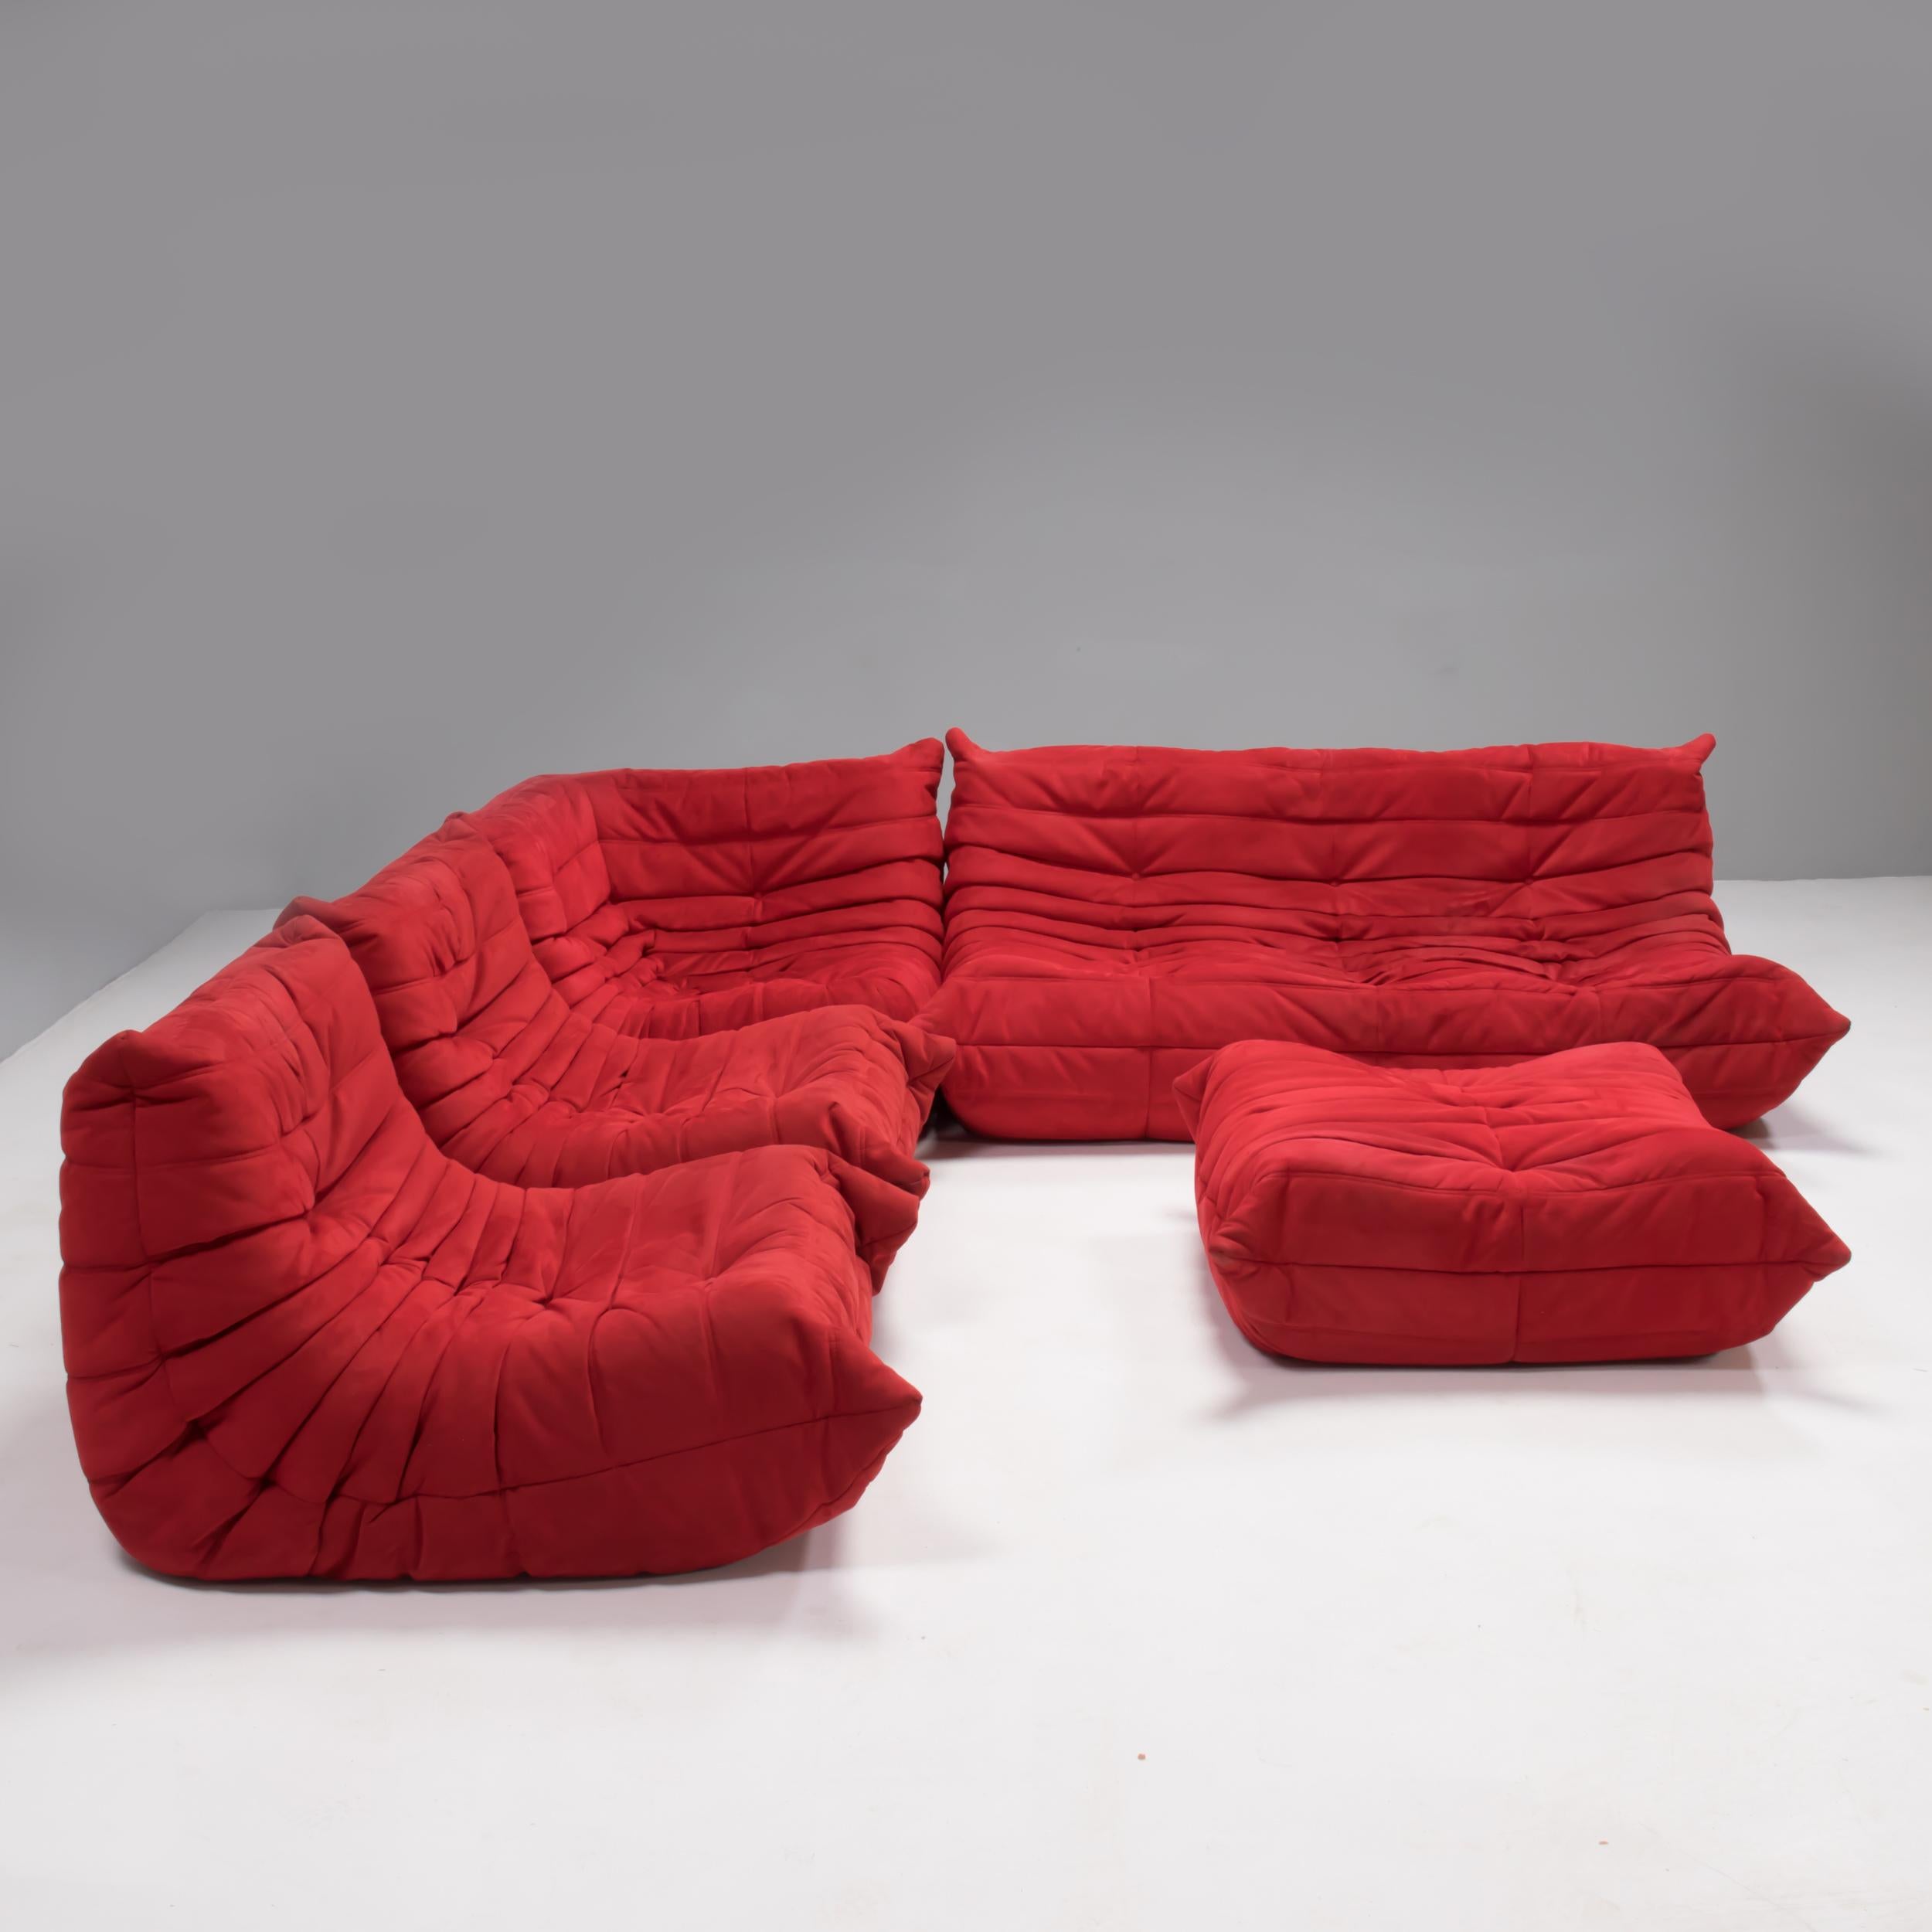 The iconic Togo sofa, originally designed by Michel Ducaroy for Ligne Roset in 1973, has become a design mid century Classic.

This set of 5 sofa set is incredibly versatile and can be used alone or paired with other pieces from the range. The